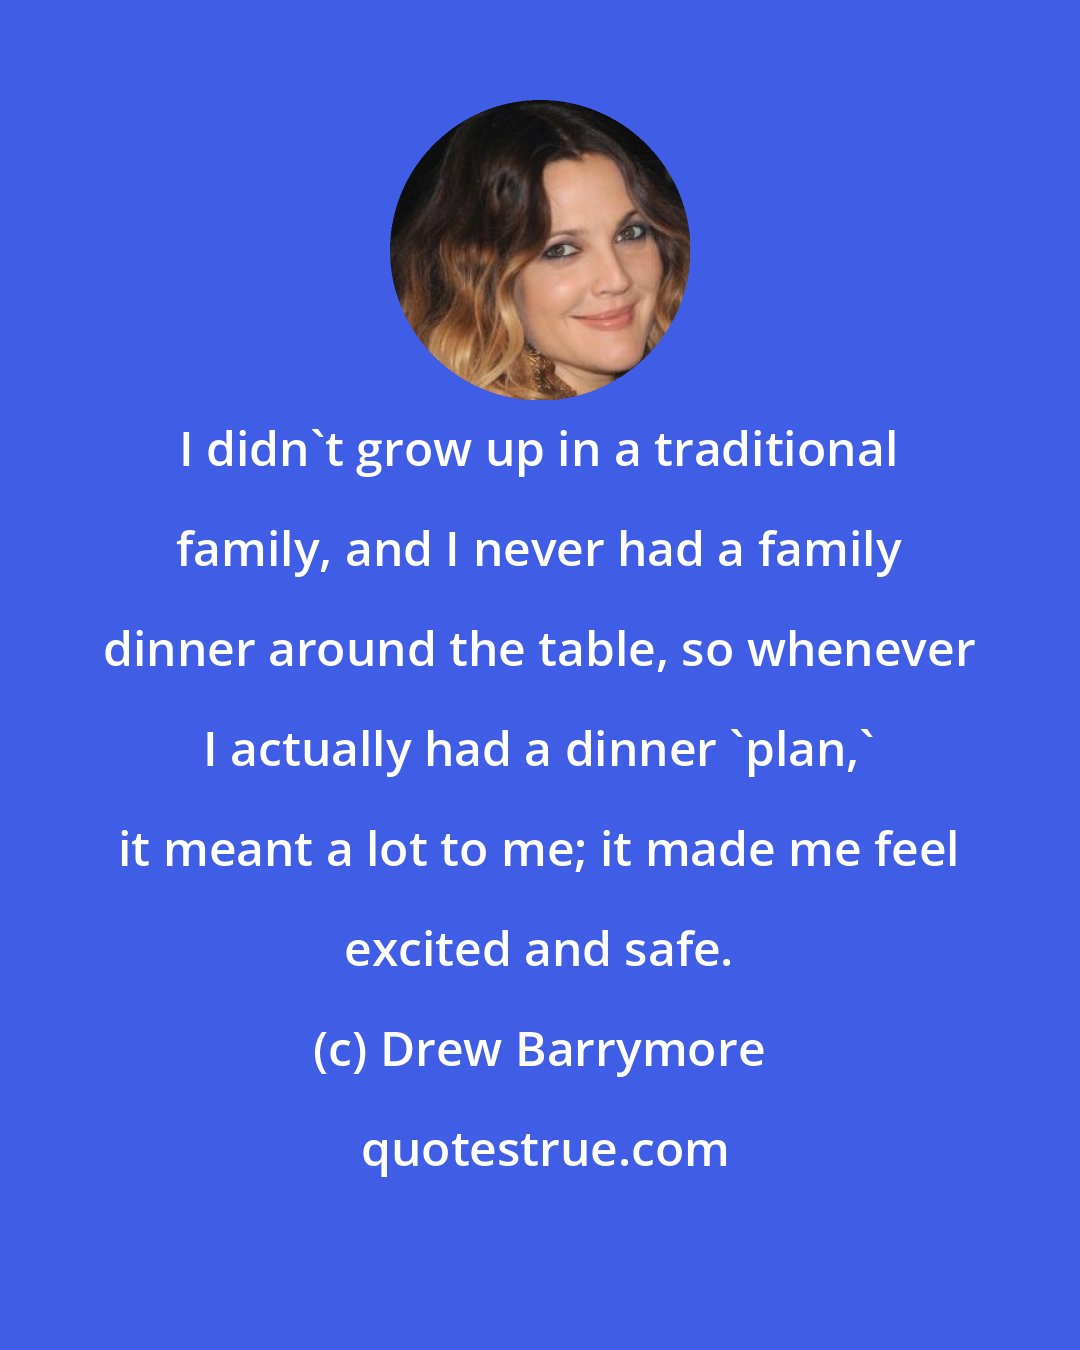 Drew Barrymore: I didn't grow up in a traditional family, and I never had a family dinner around the table, so whenever I actually had a dinner 'plan,' it meant a lot to me; it made me feel excited and safe.